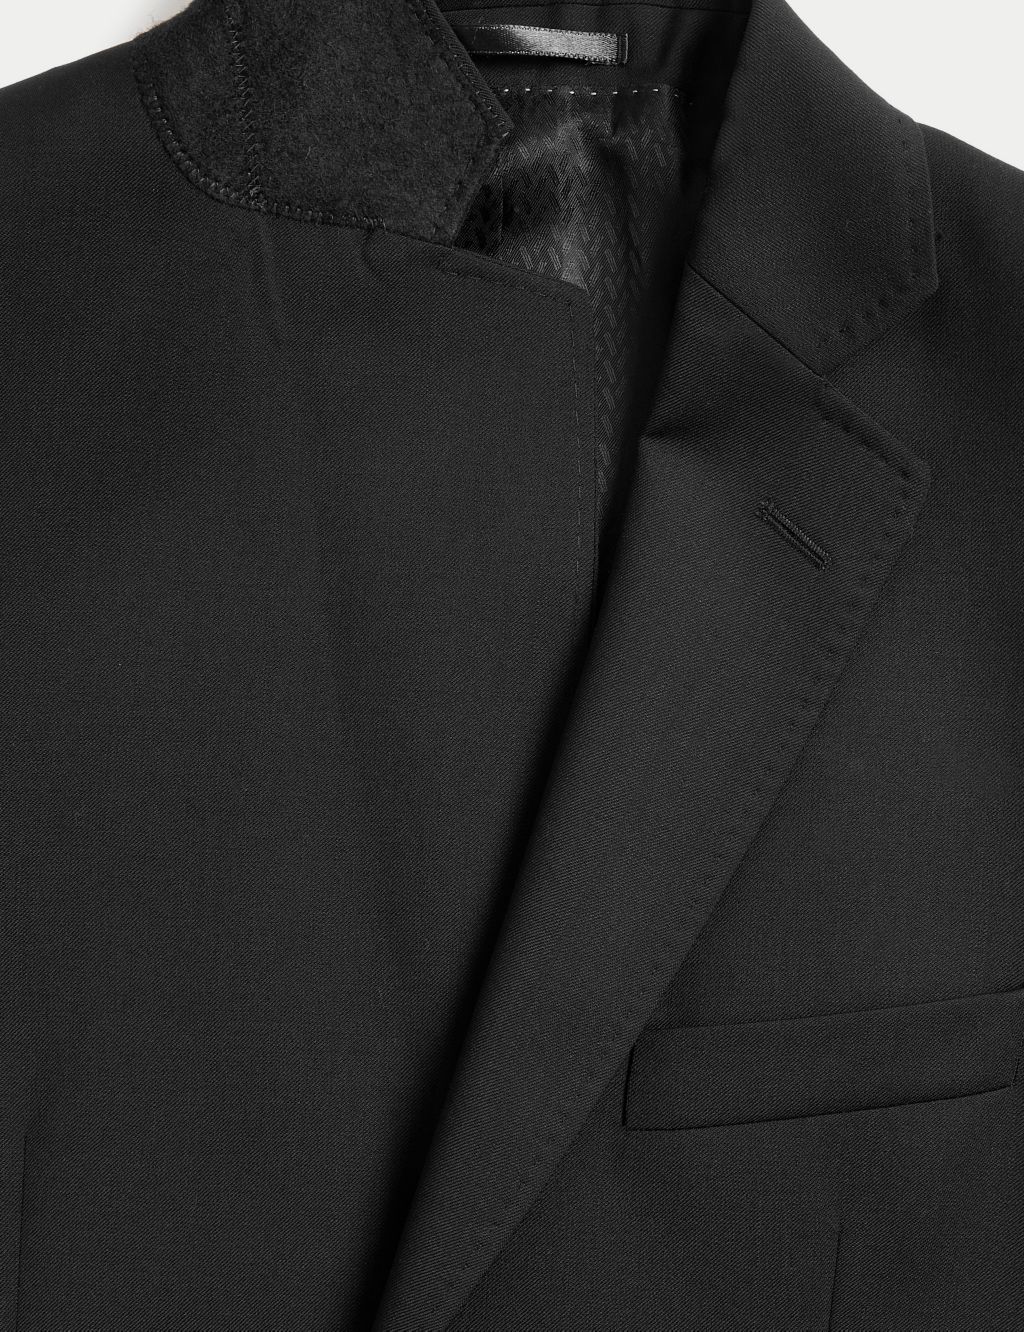 Tailored Fit Pure Wool Twill Jacket image 2